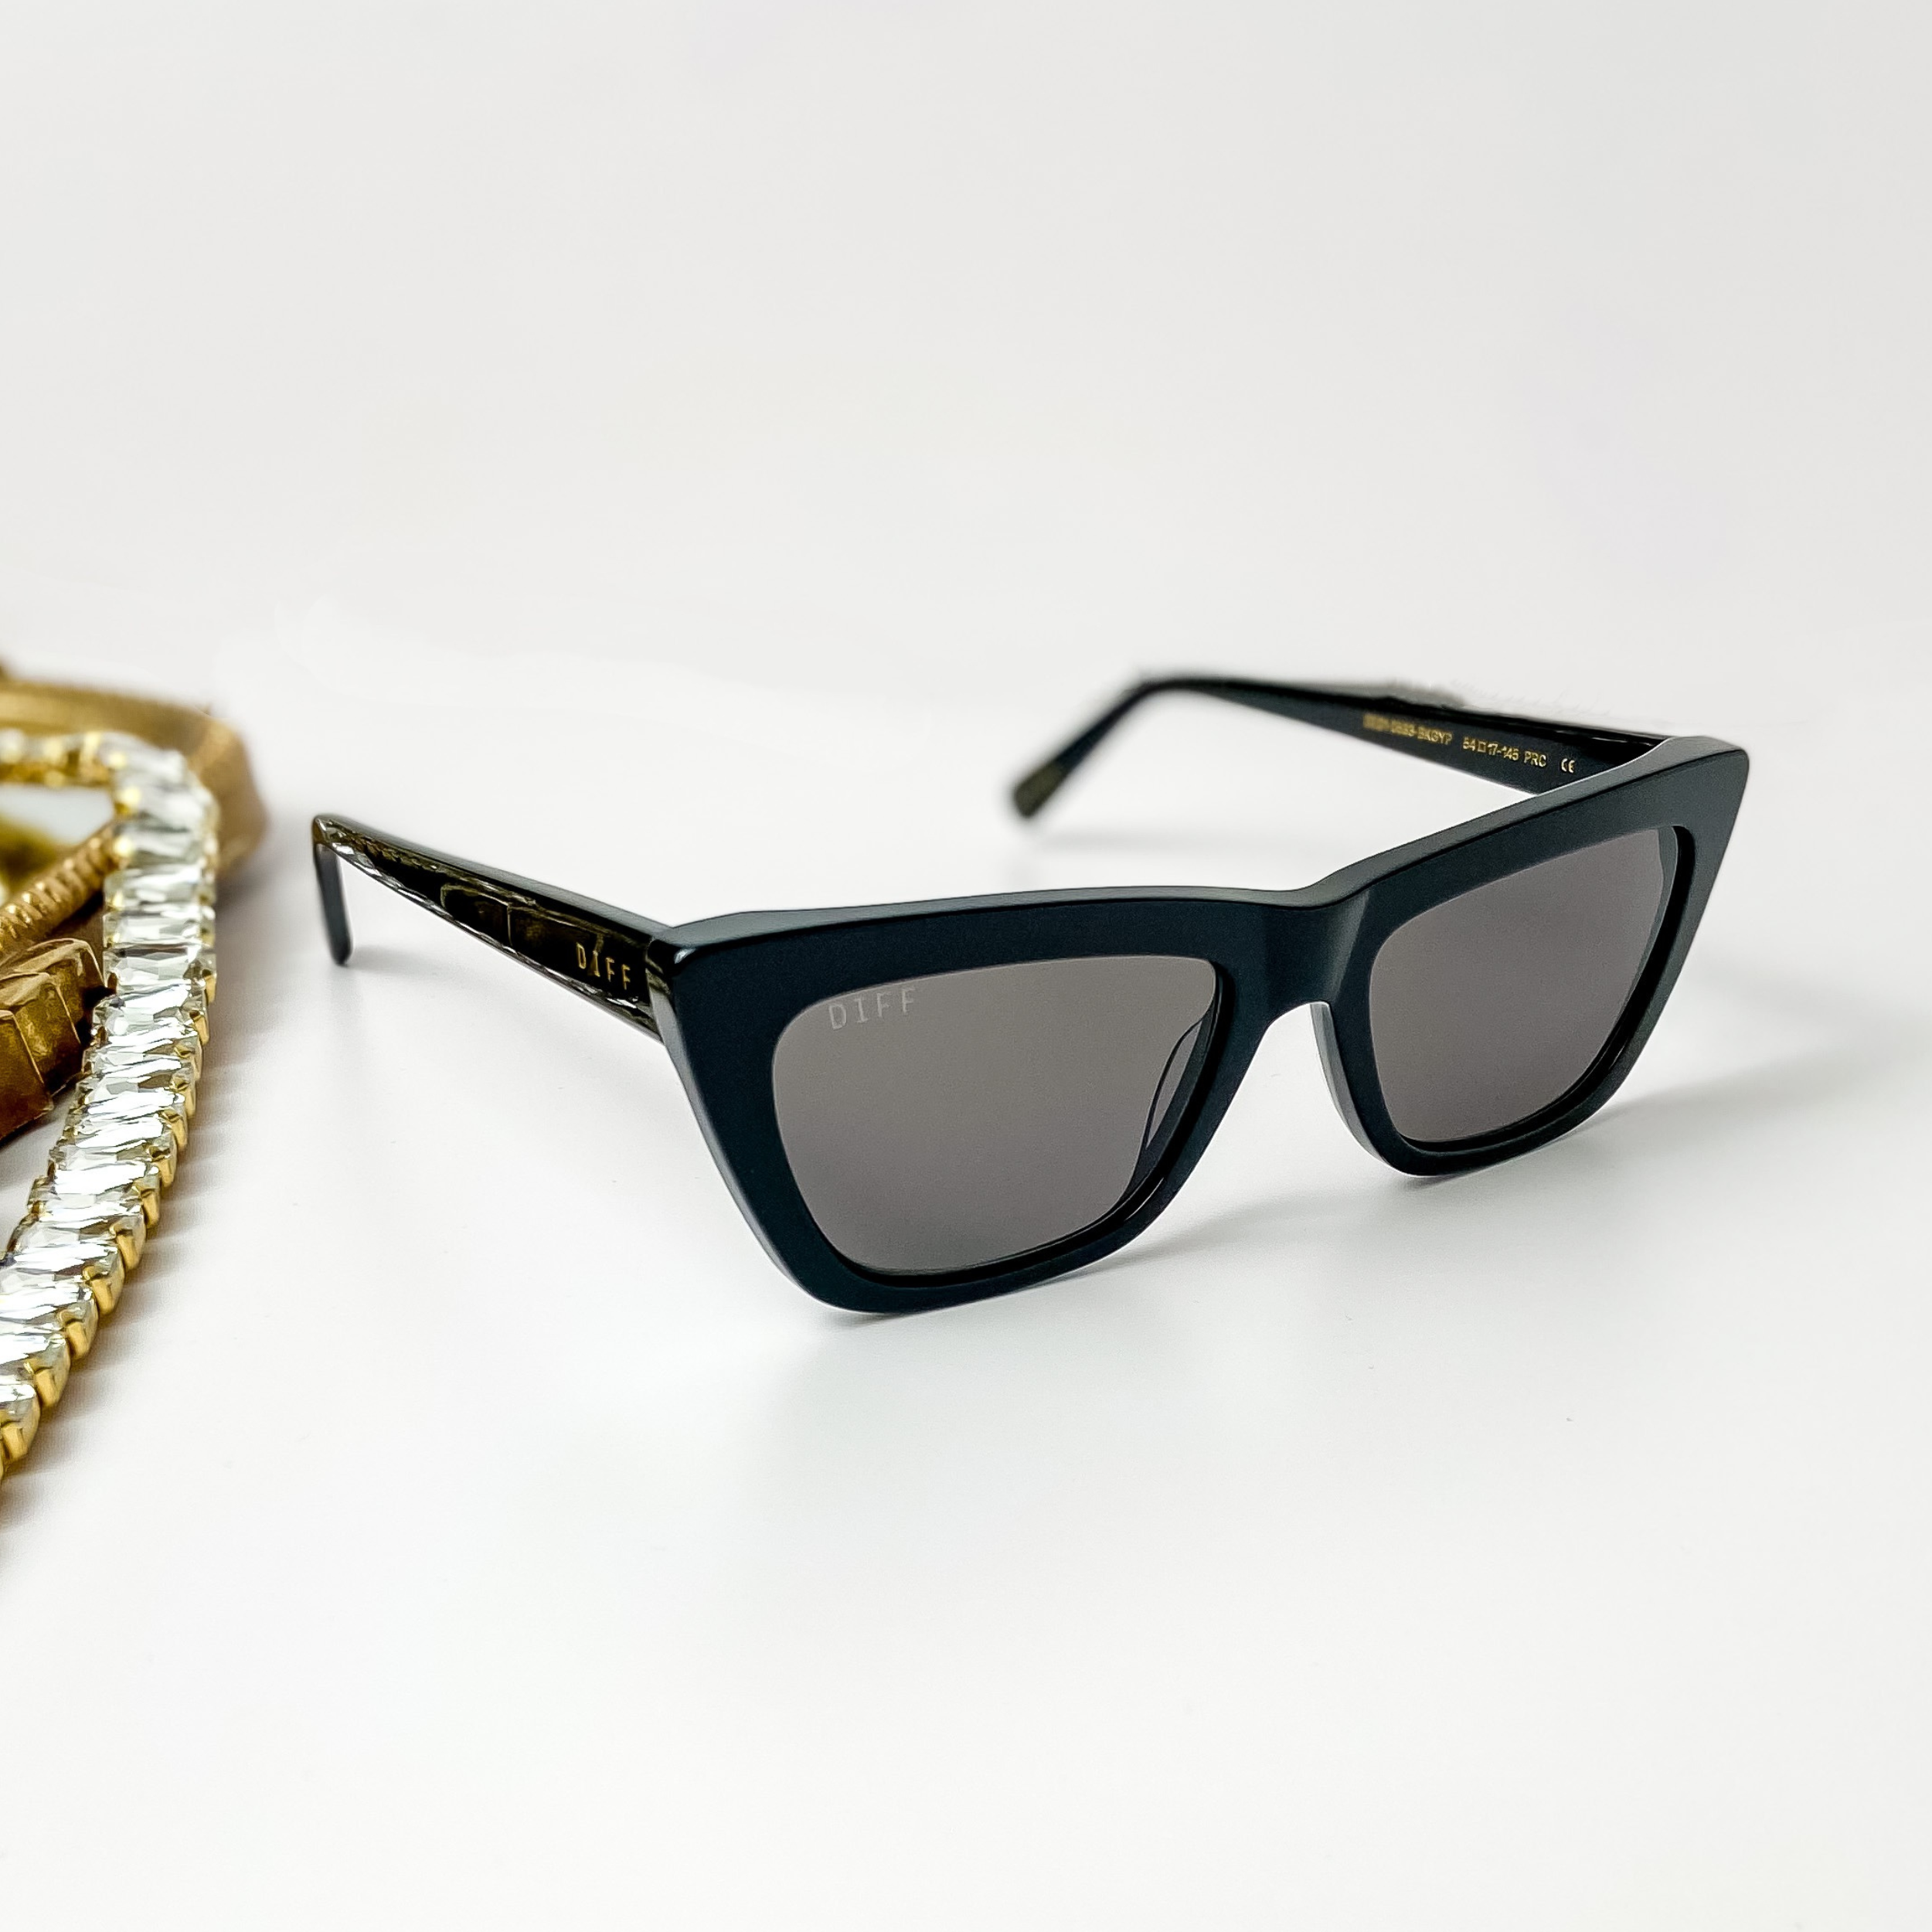 A pair of black cat-eye sunglasses pictured on a white background with gold jewelry.